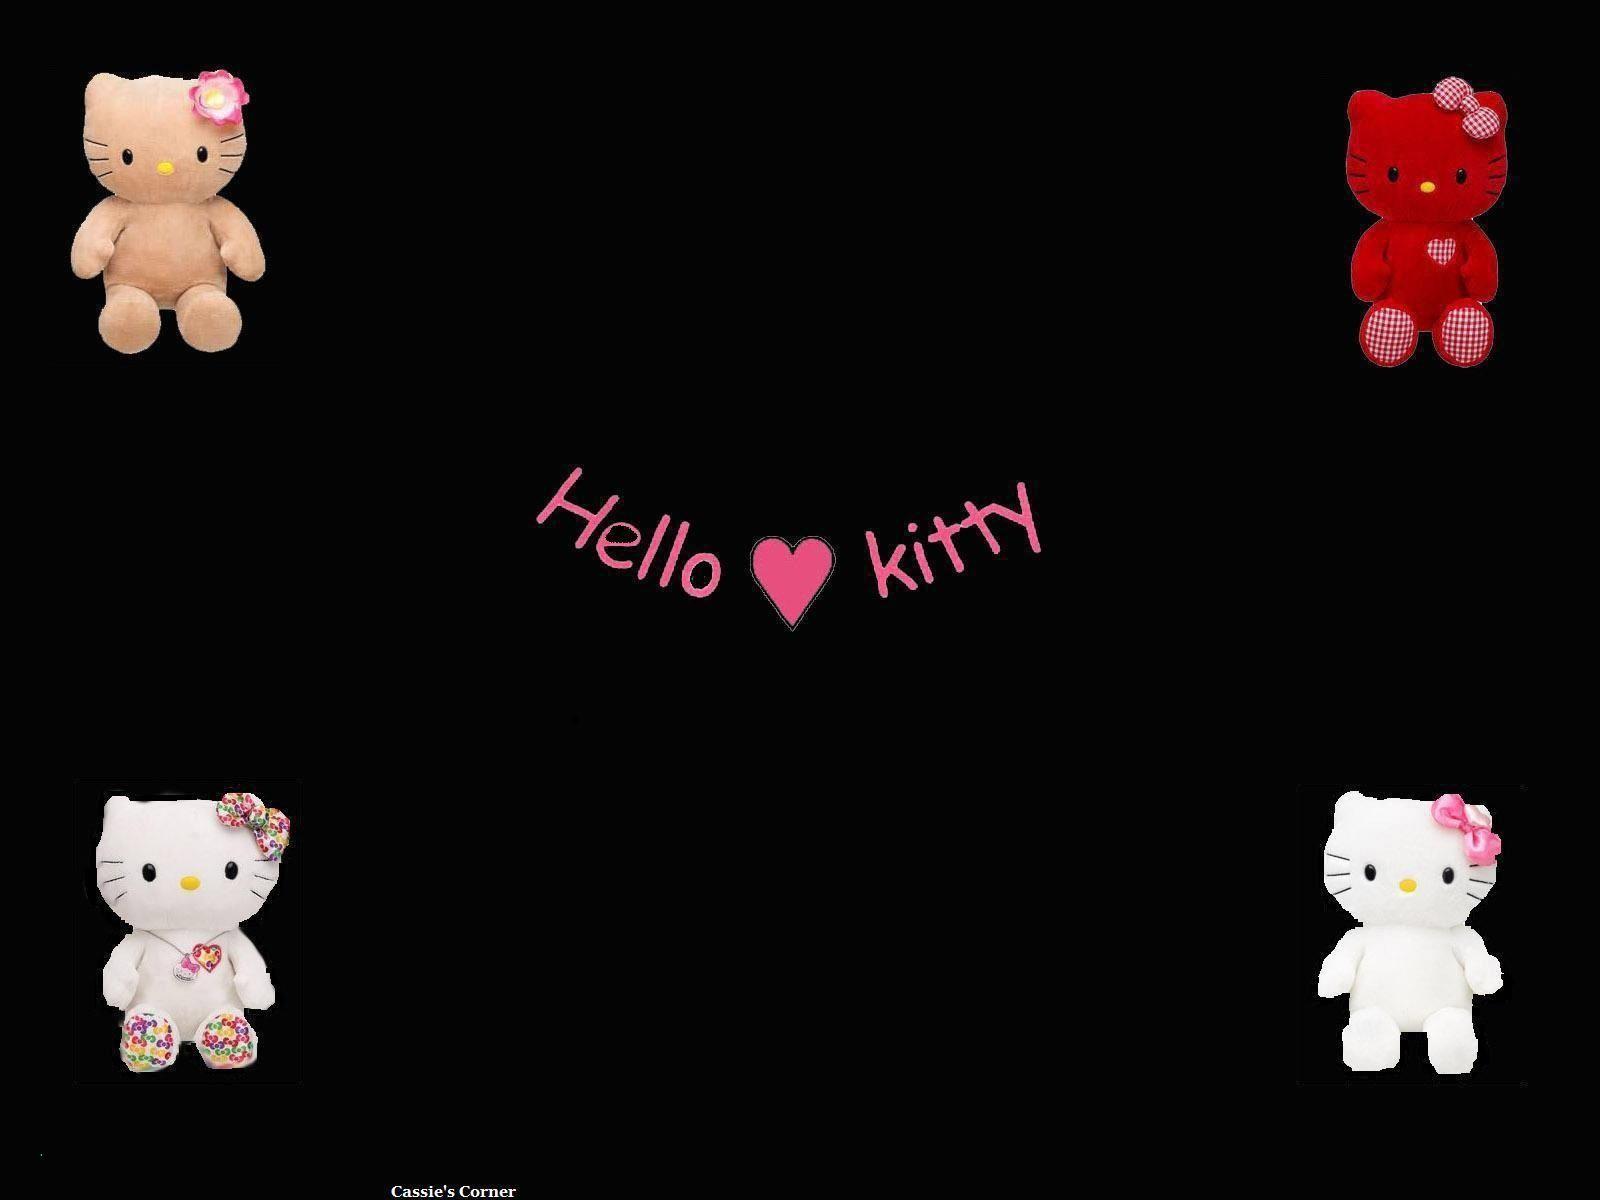 New Wallpaper Black Hello Kitty. LOVE WALLPAPER PAGES